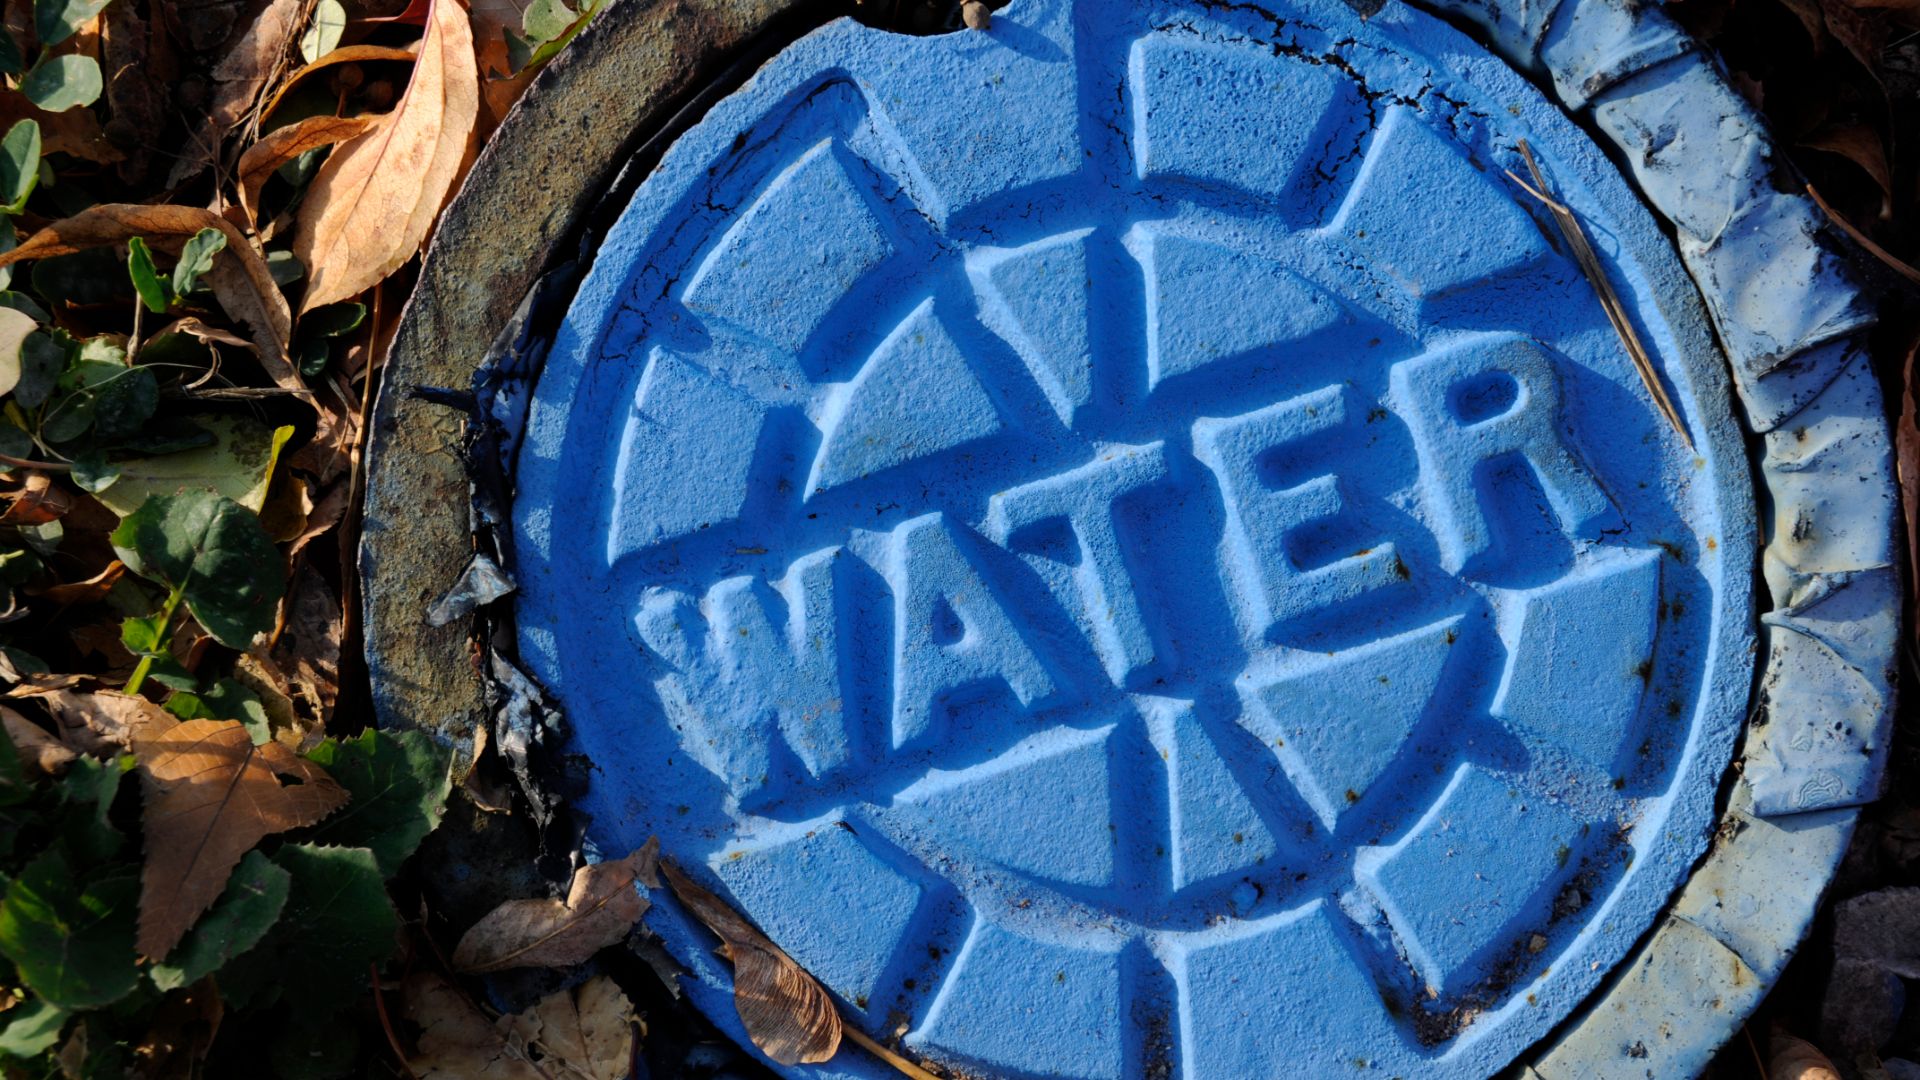 Bright blue water main cap surrounded by leaves and grass reads "WATER"